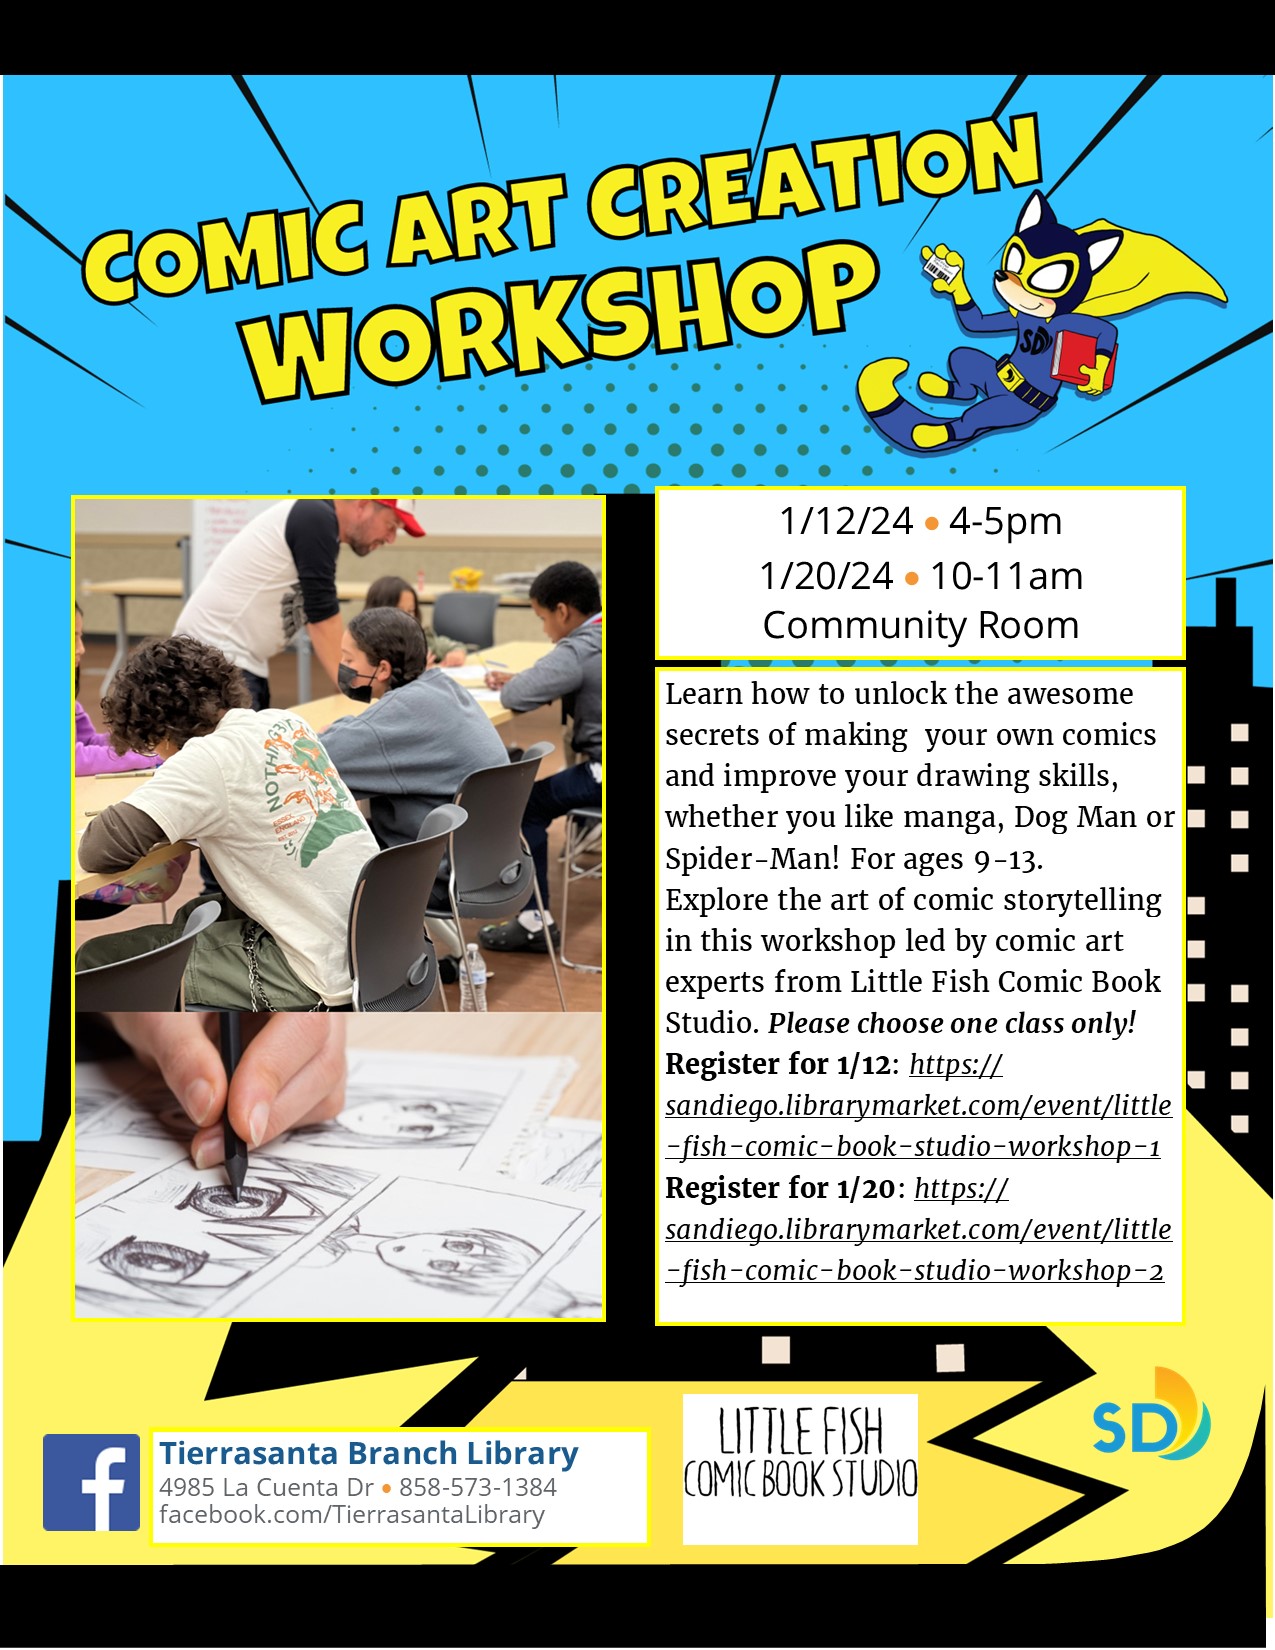 Flyer with ODI the Coyote as a comic book super hero and kids drawing